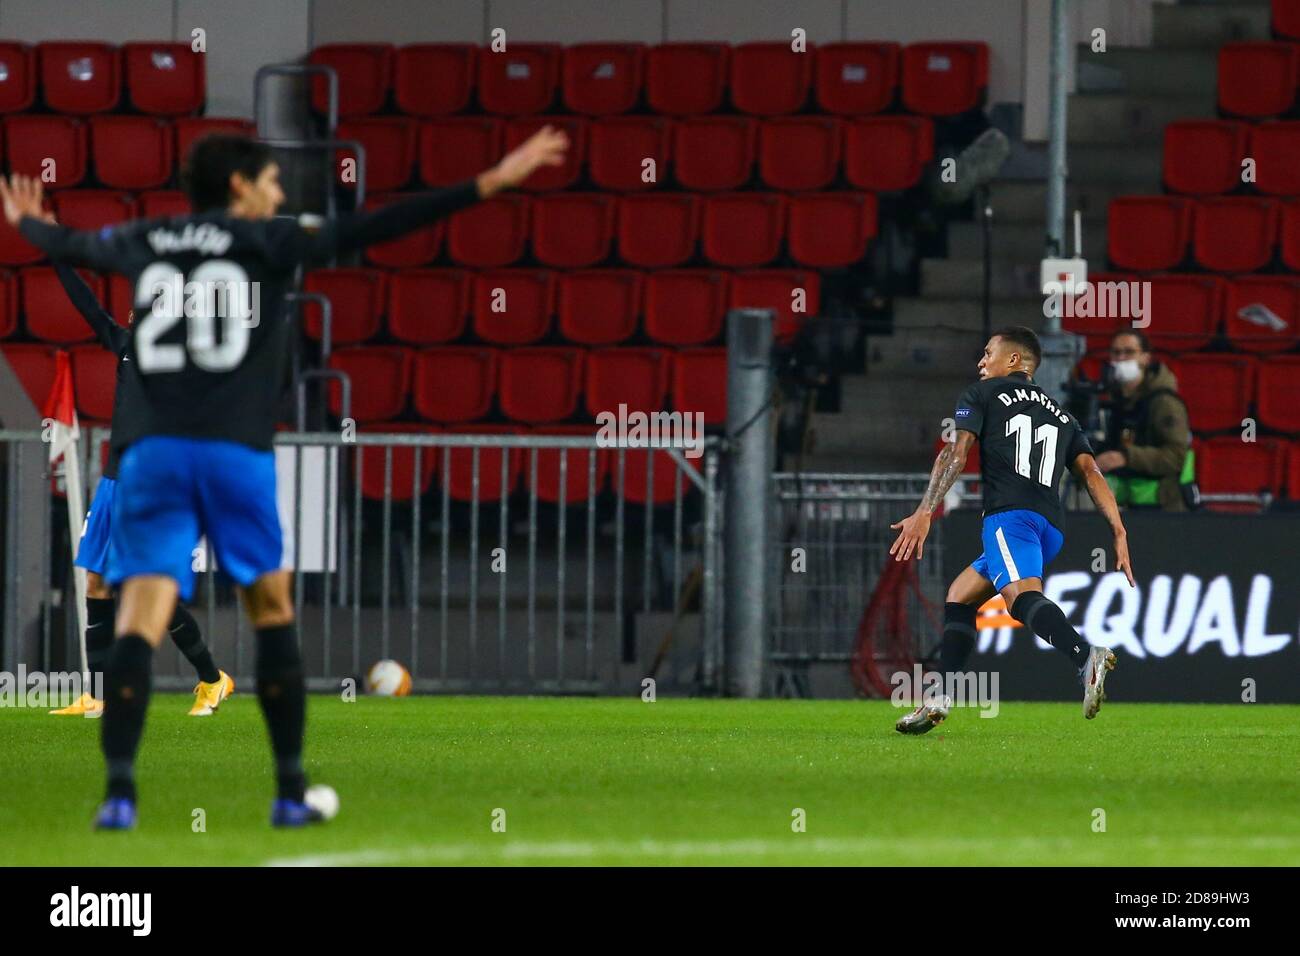 Darwin Machis of Granada (11) celebrates his goal during the UEFA Europa League, Group Stage, Group E football match between PSV Eindhoven and Grana C Stock Photo